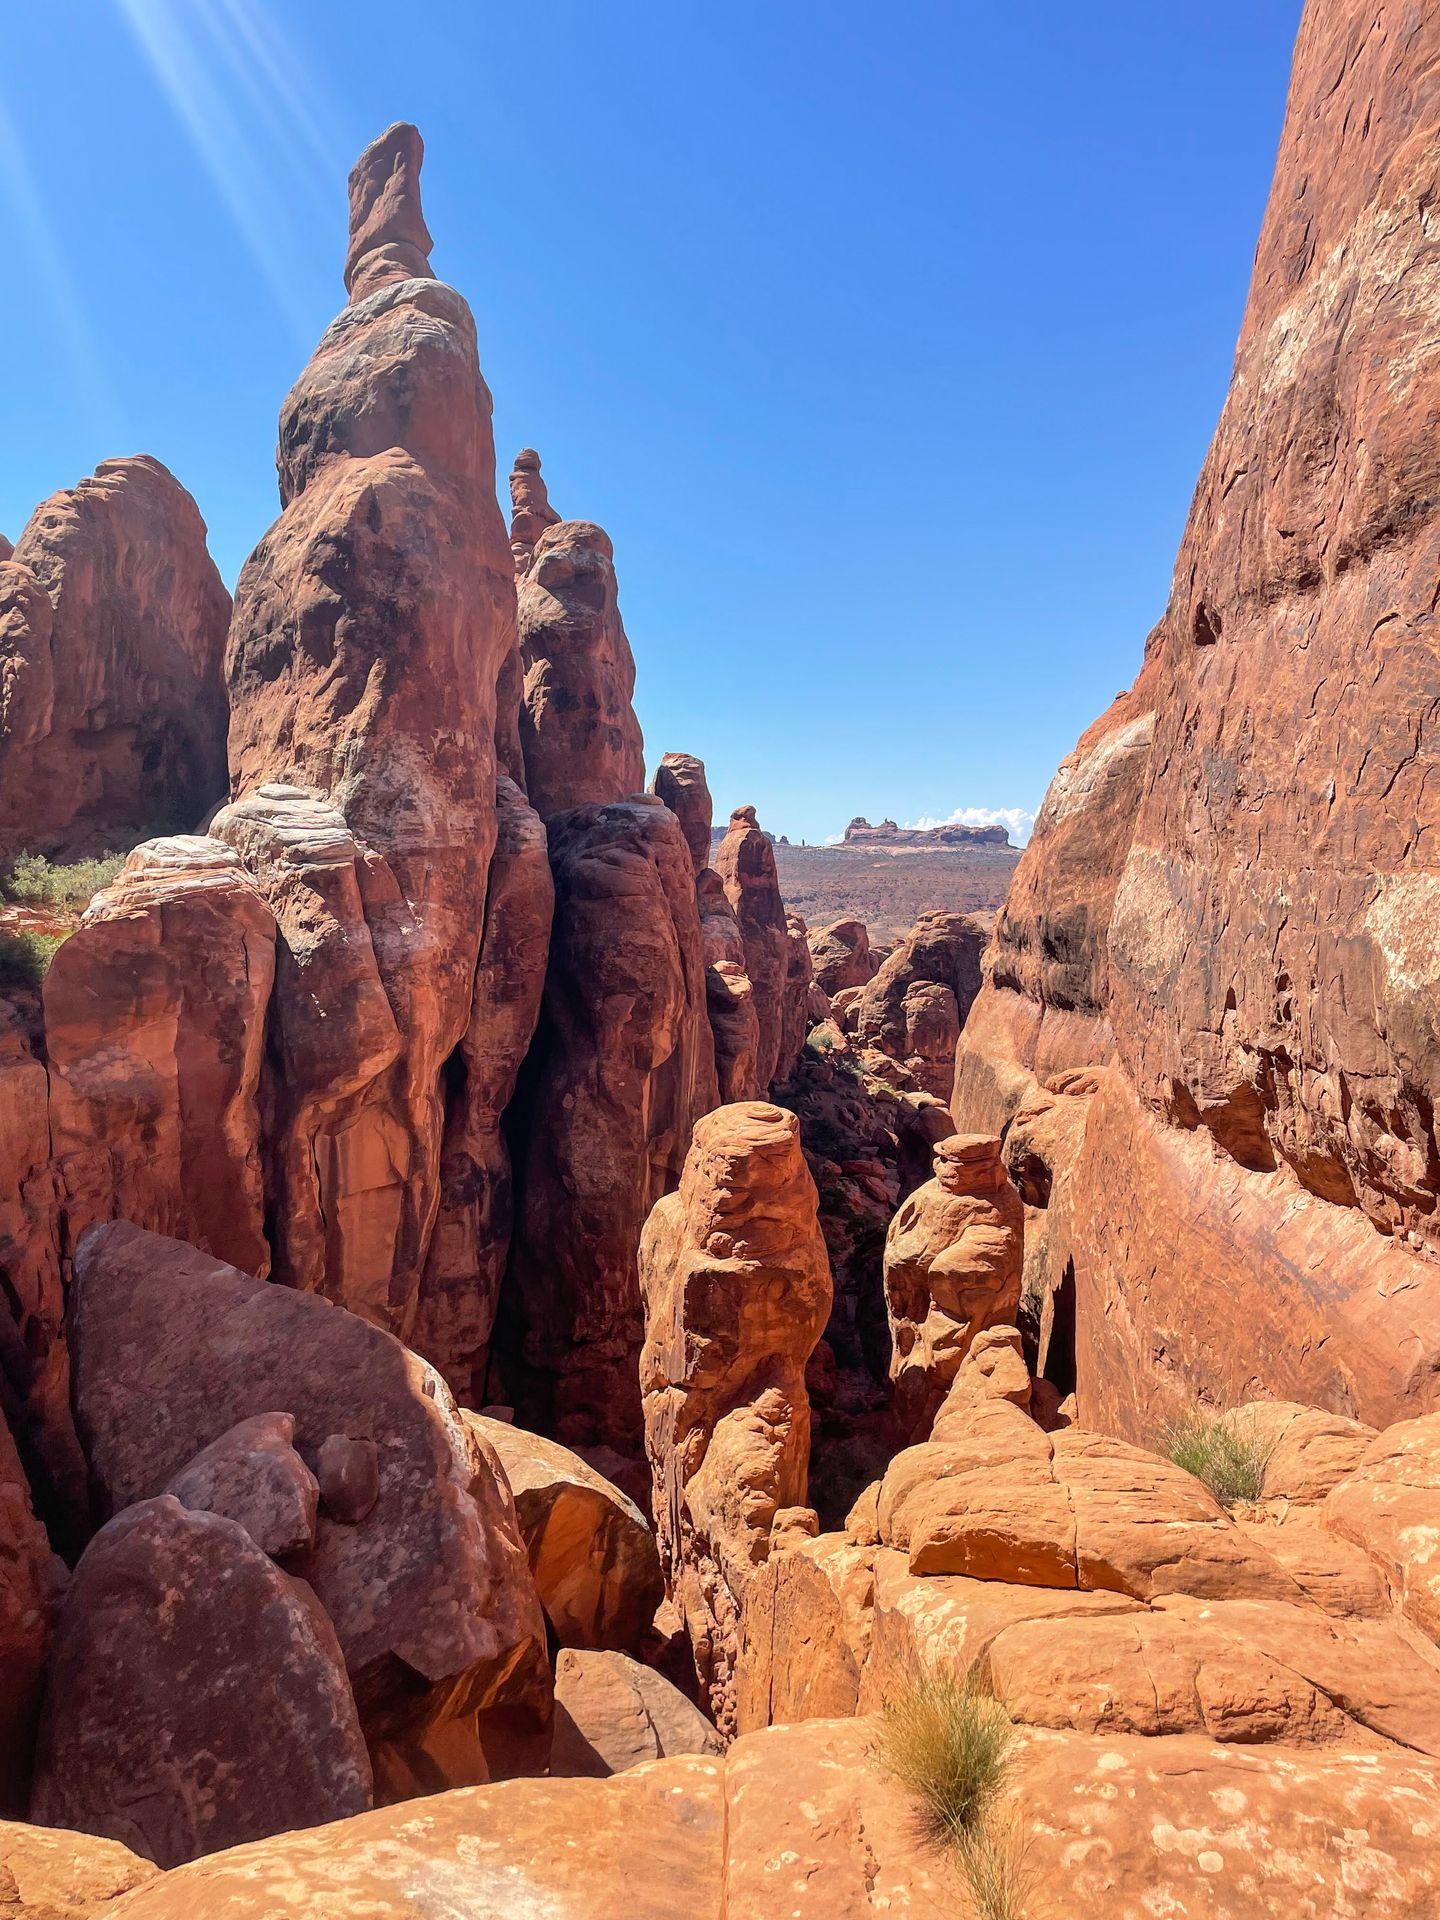 Looking at several rock spires inside of the Fiery Furnace